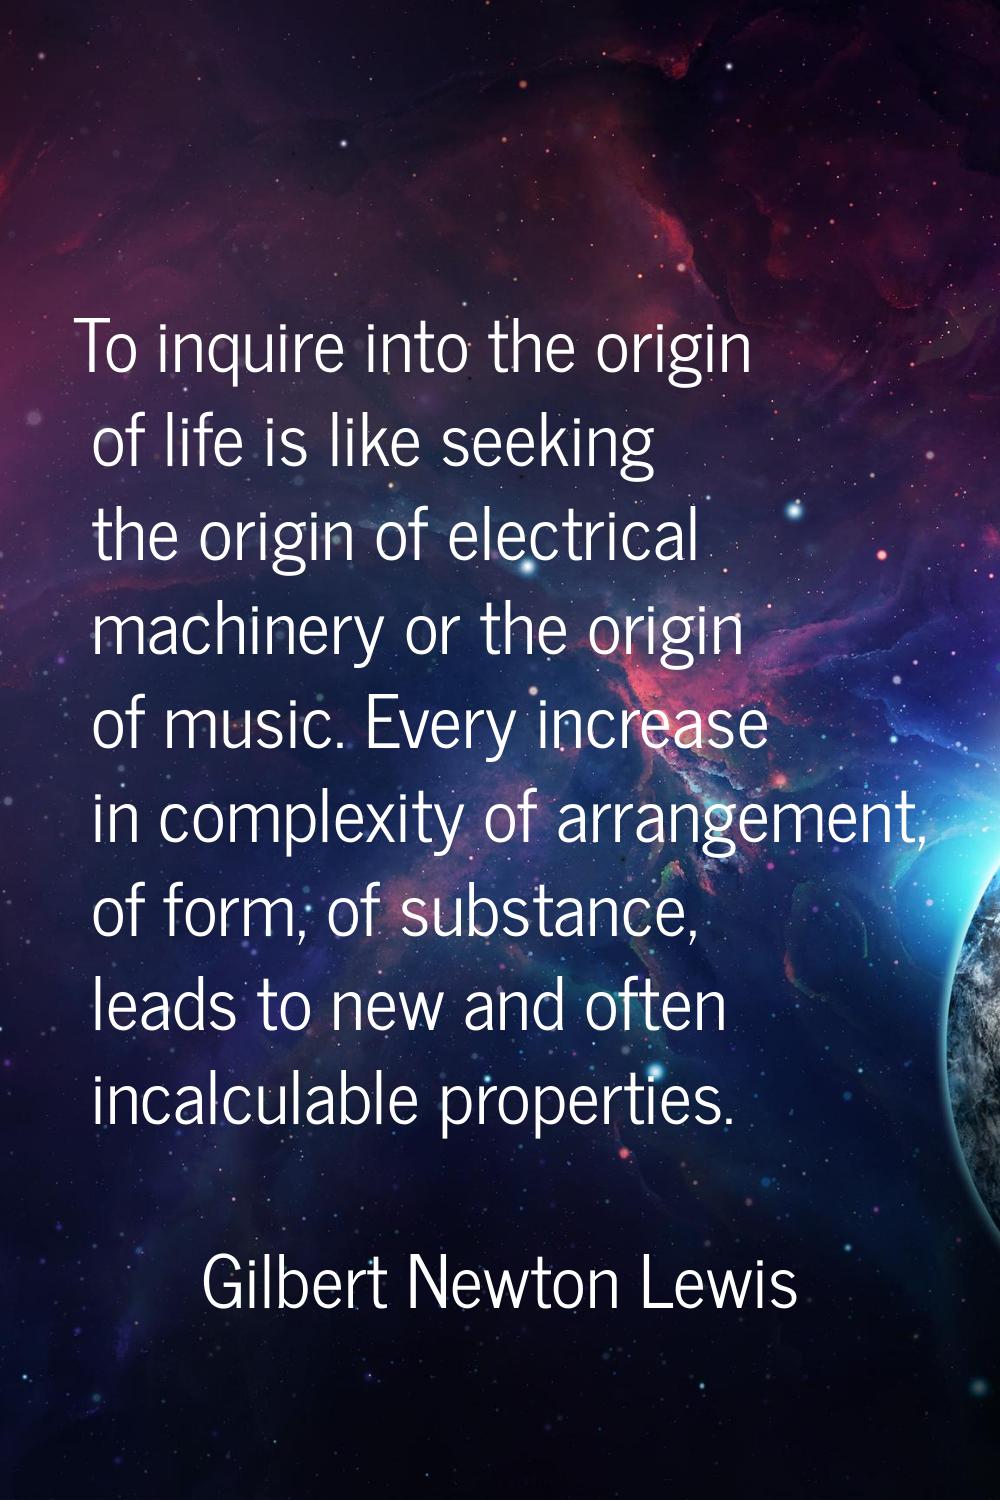 To inquire into the origin of life is like seeking the origin of electrical machinery or the origin